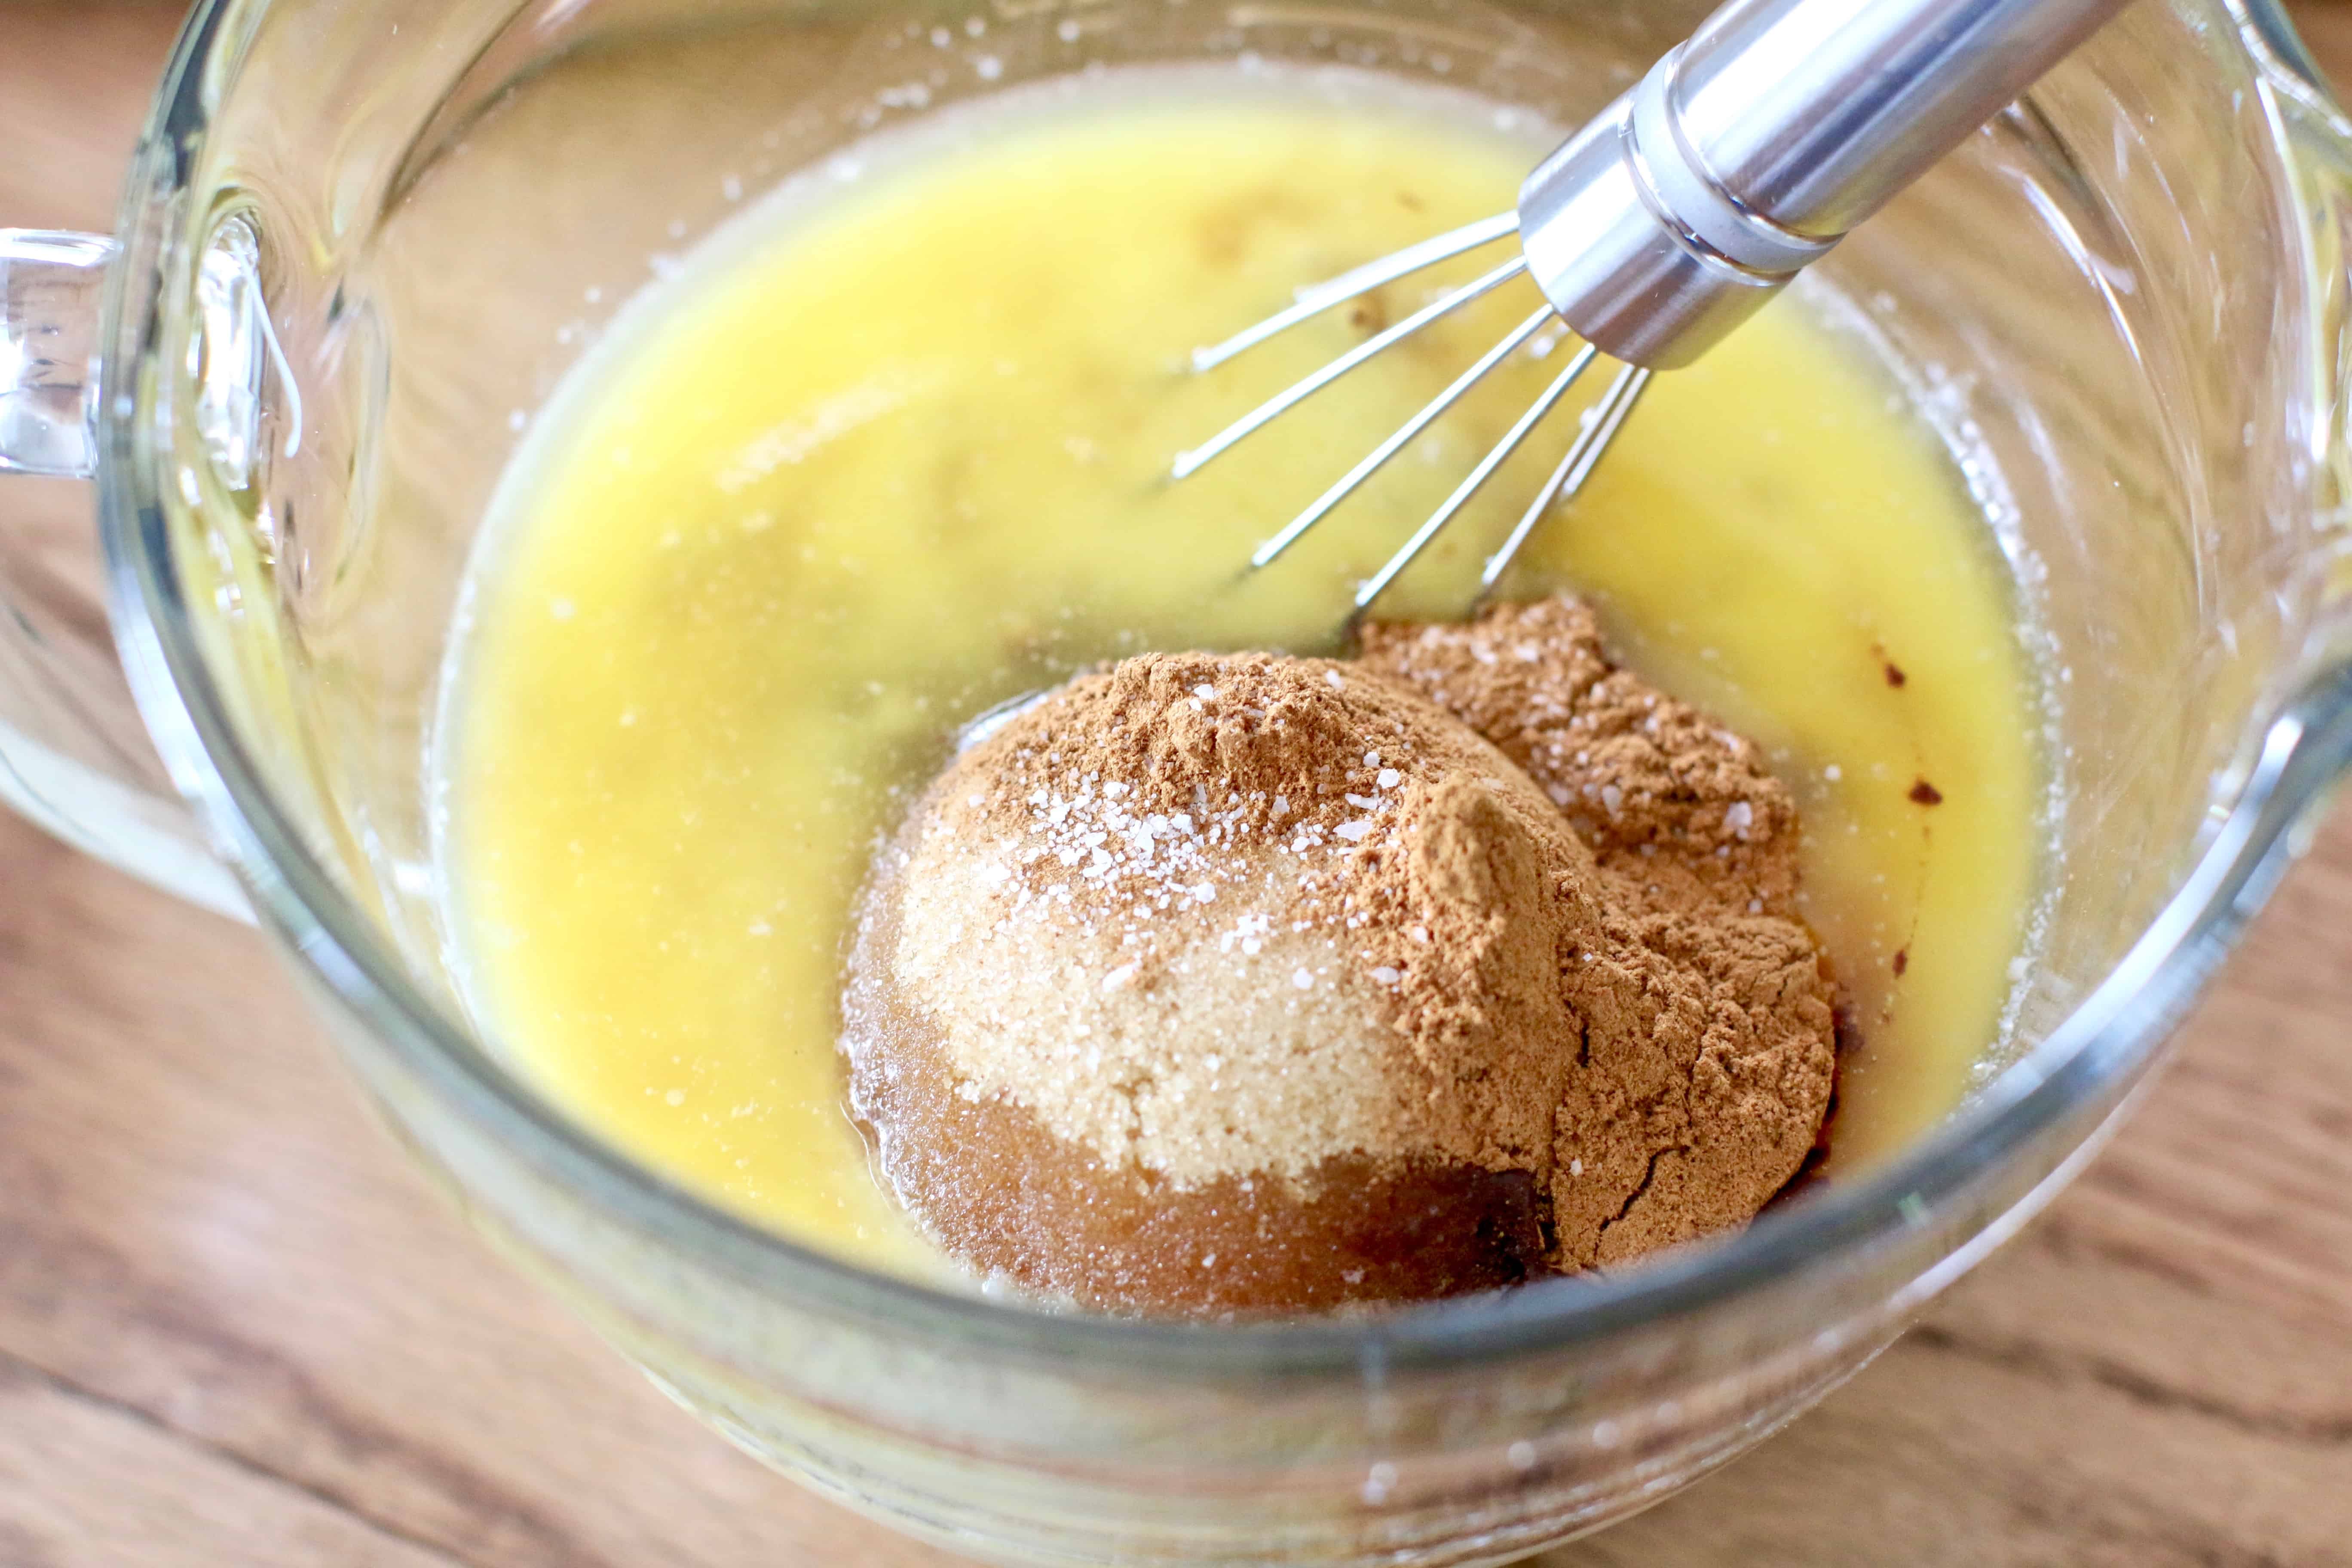 sweetened condensed milk, cinnamon, melted butter, brown sugar whisked together in a bowl.